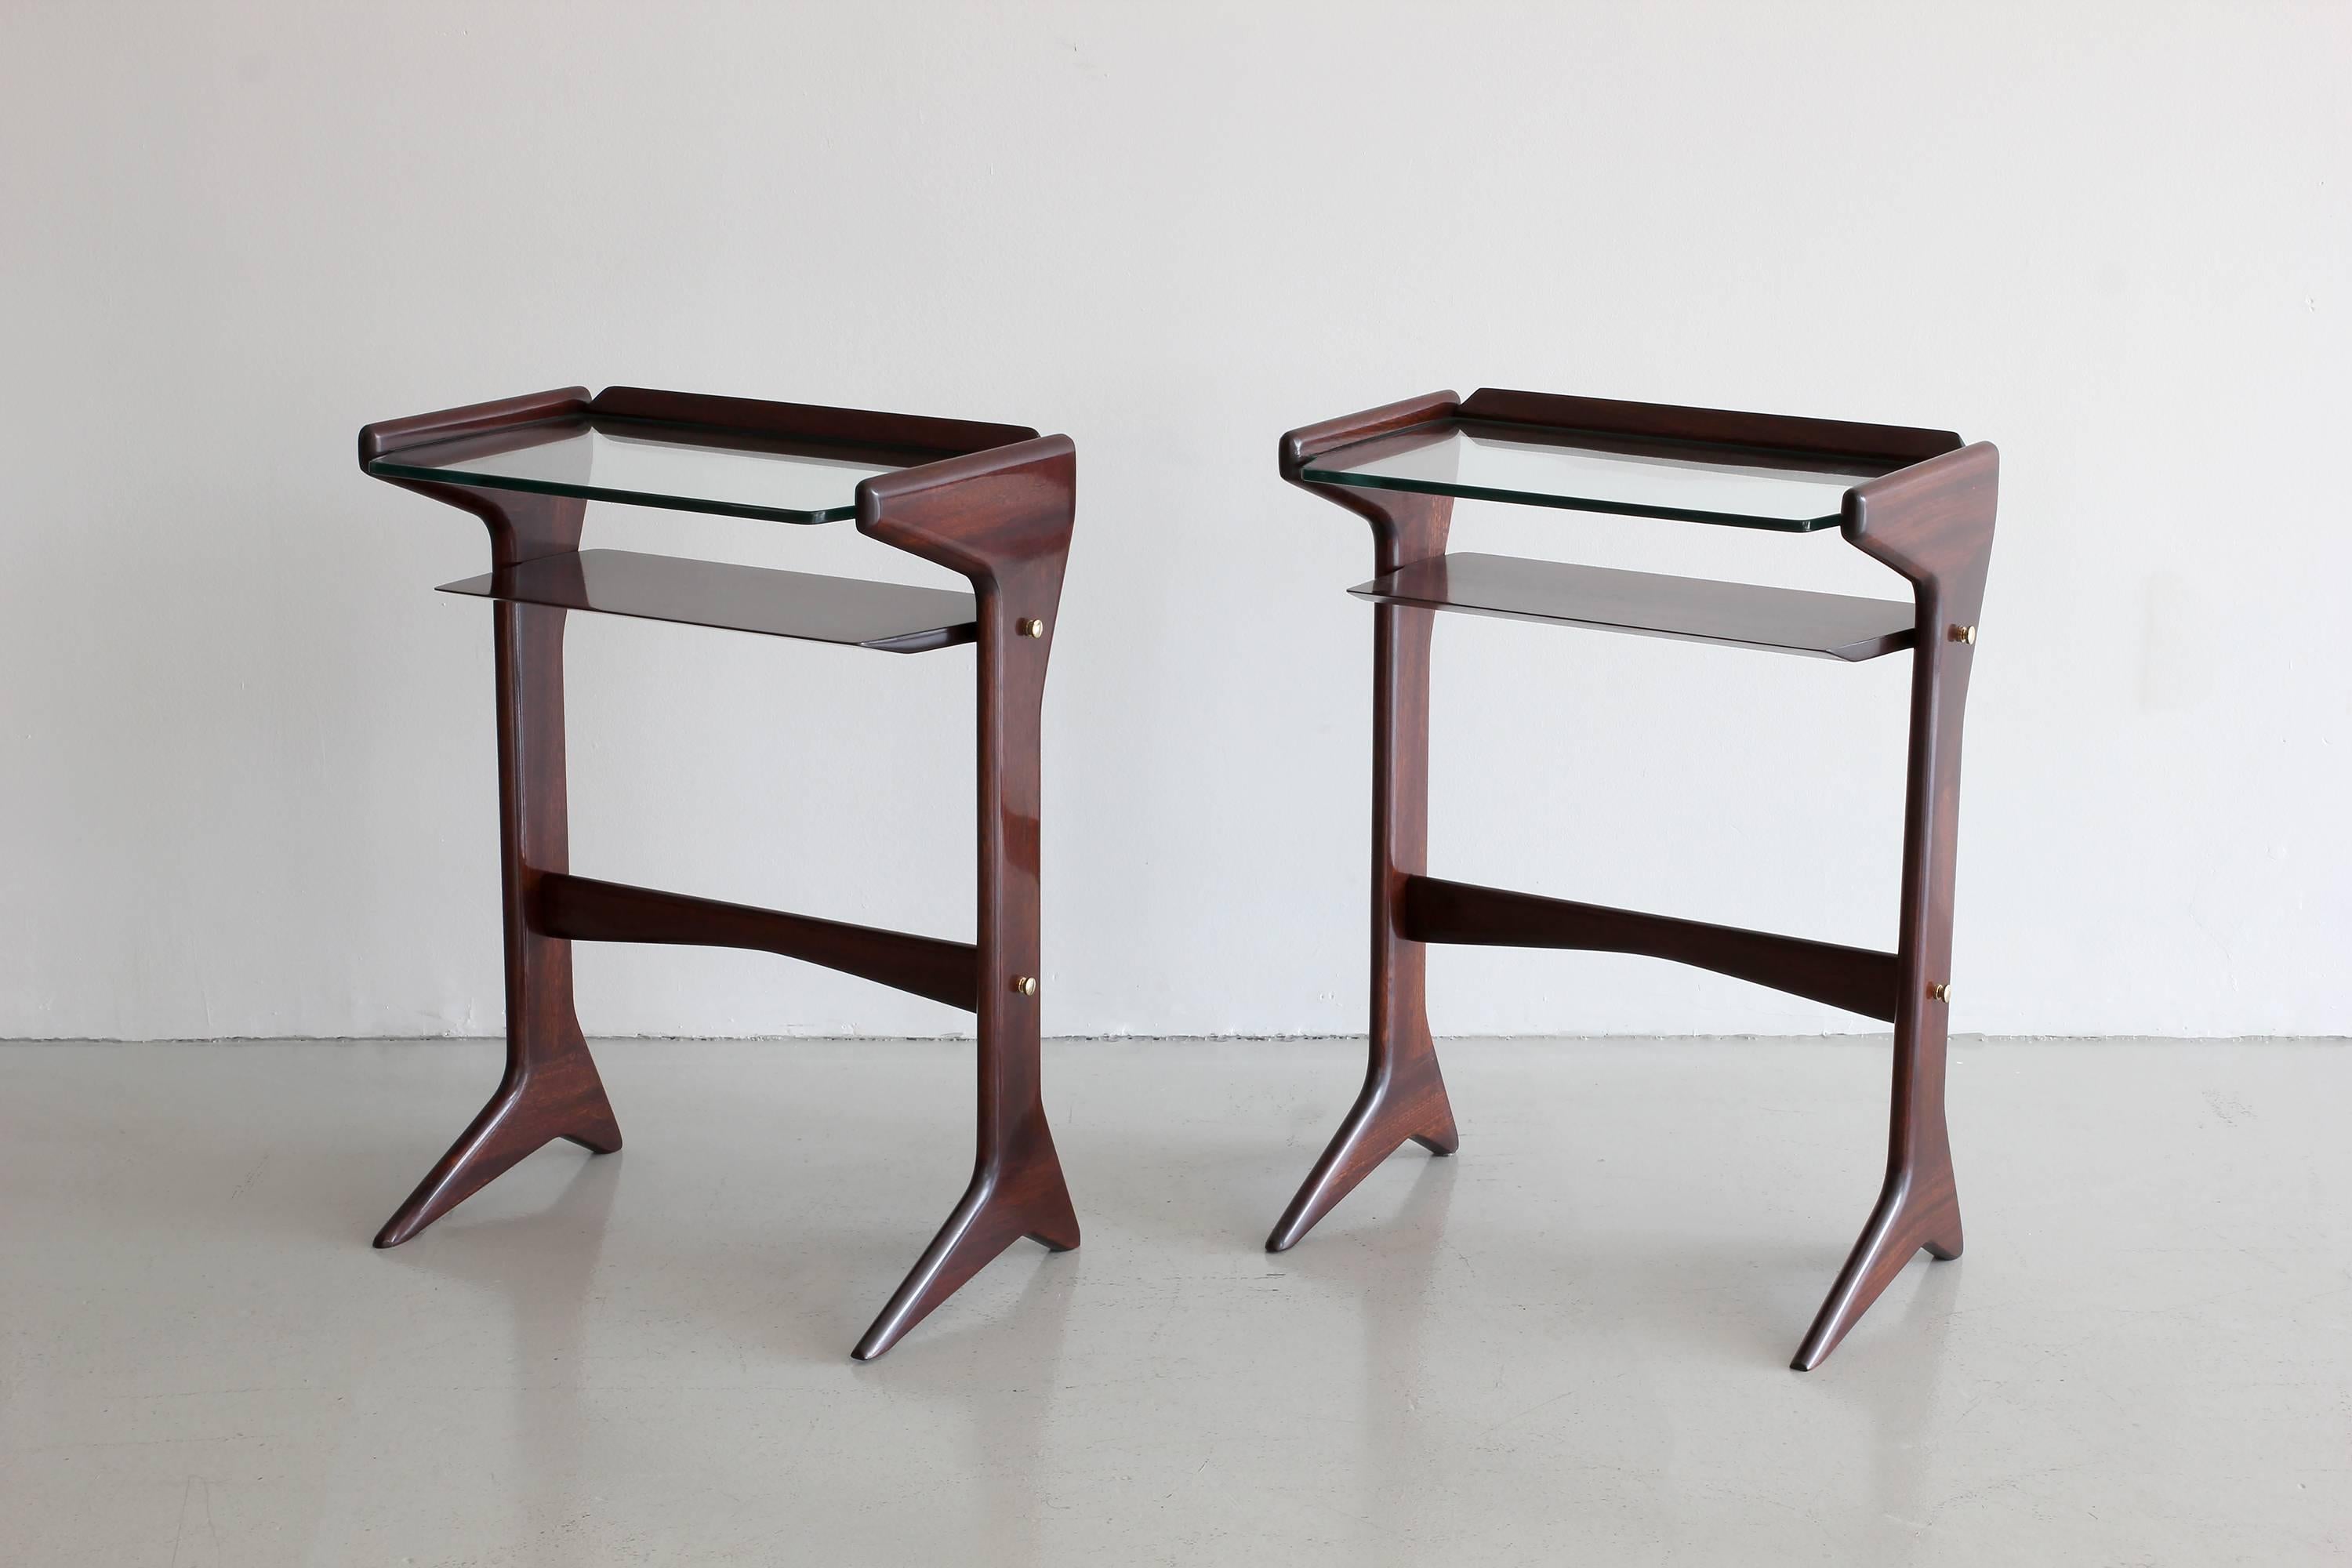 Beautiful Italian glass end tables by Ico parisi. 
Mahogany with cantilevered glass tiered surfaces. 
Wonderful lines and scale. 
Professionally refinished in French polished mahogany.
Brass joint hardware.